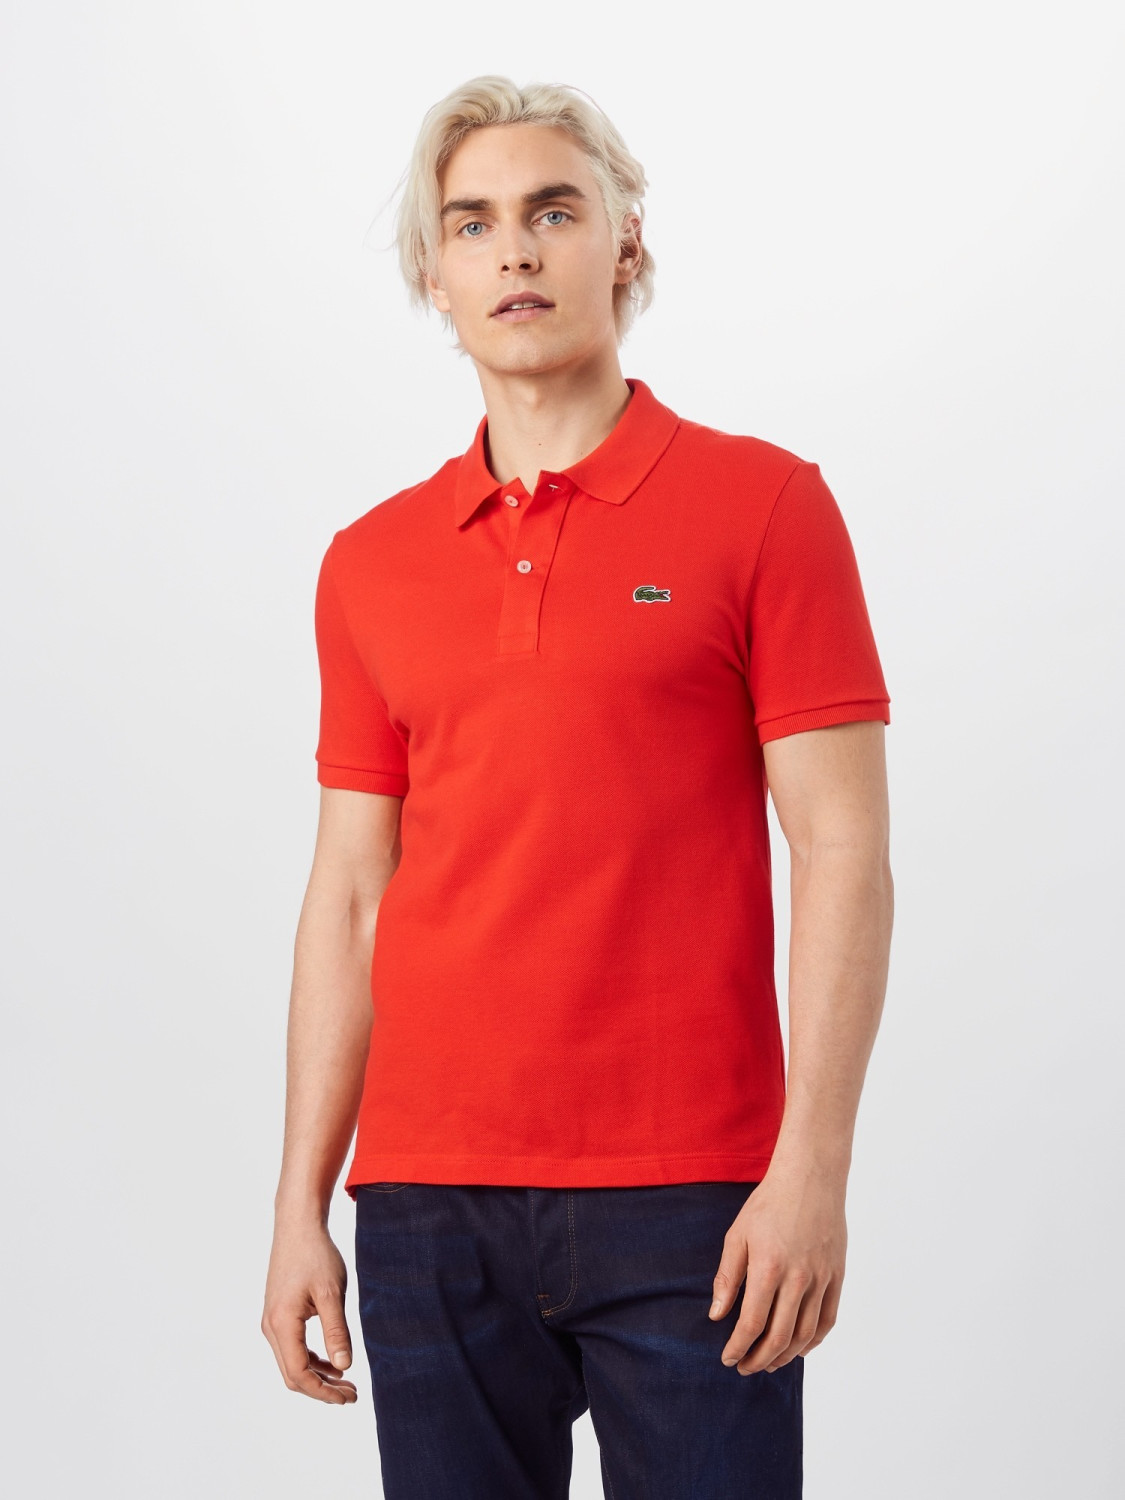 Buy Lacoste Slim Fit Polo Shirt (PH4012) red s5h from £89.00 (Today ...